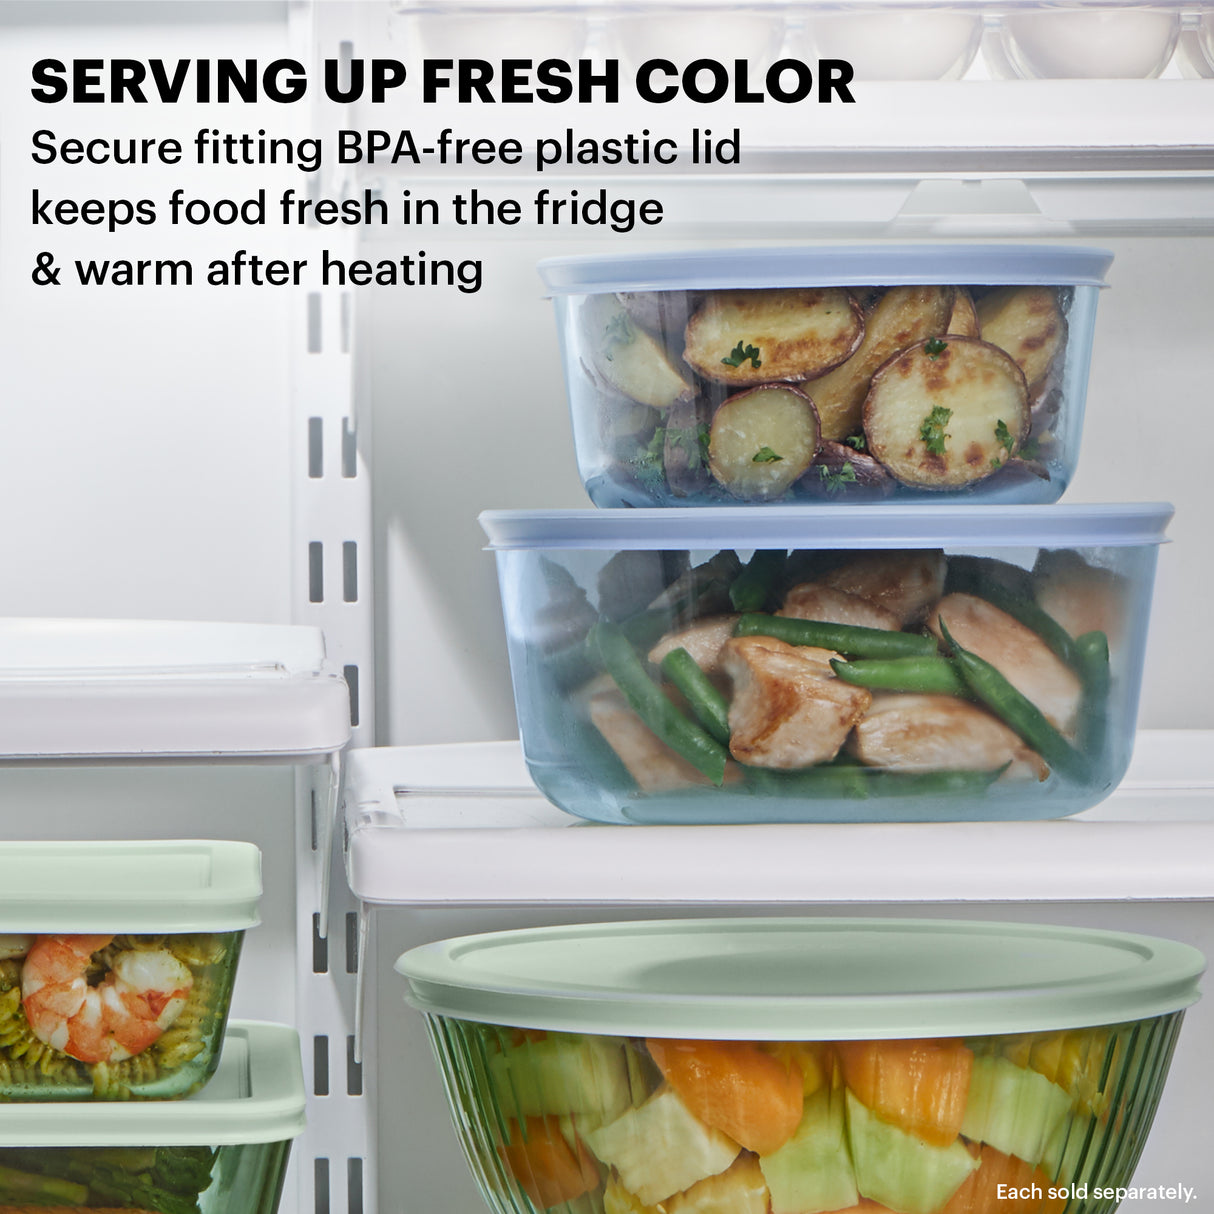 Pyrex Colors in fridge with text serving up fresh color secure fitting BPAfree plastic lid keeps food fresh in fridge & warm after heating